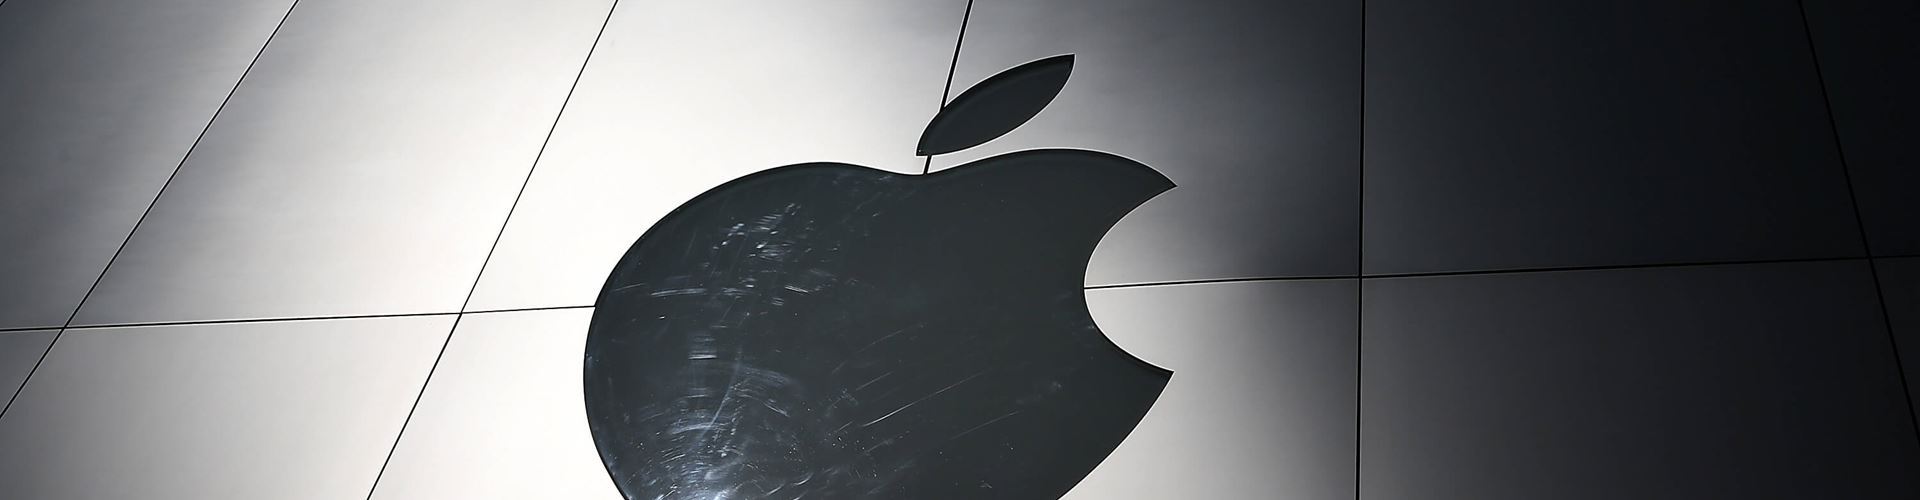 Apple hires 11,000 female employees within a year